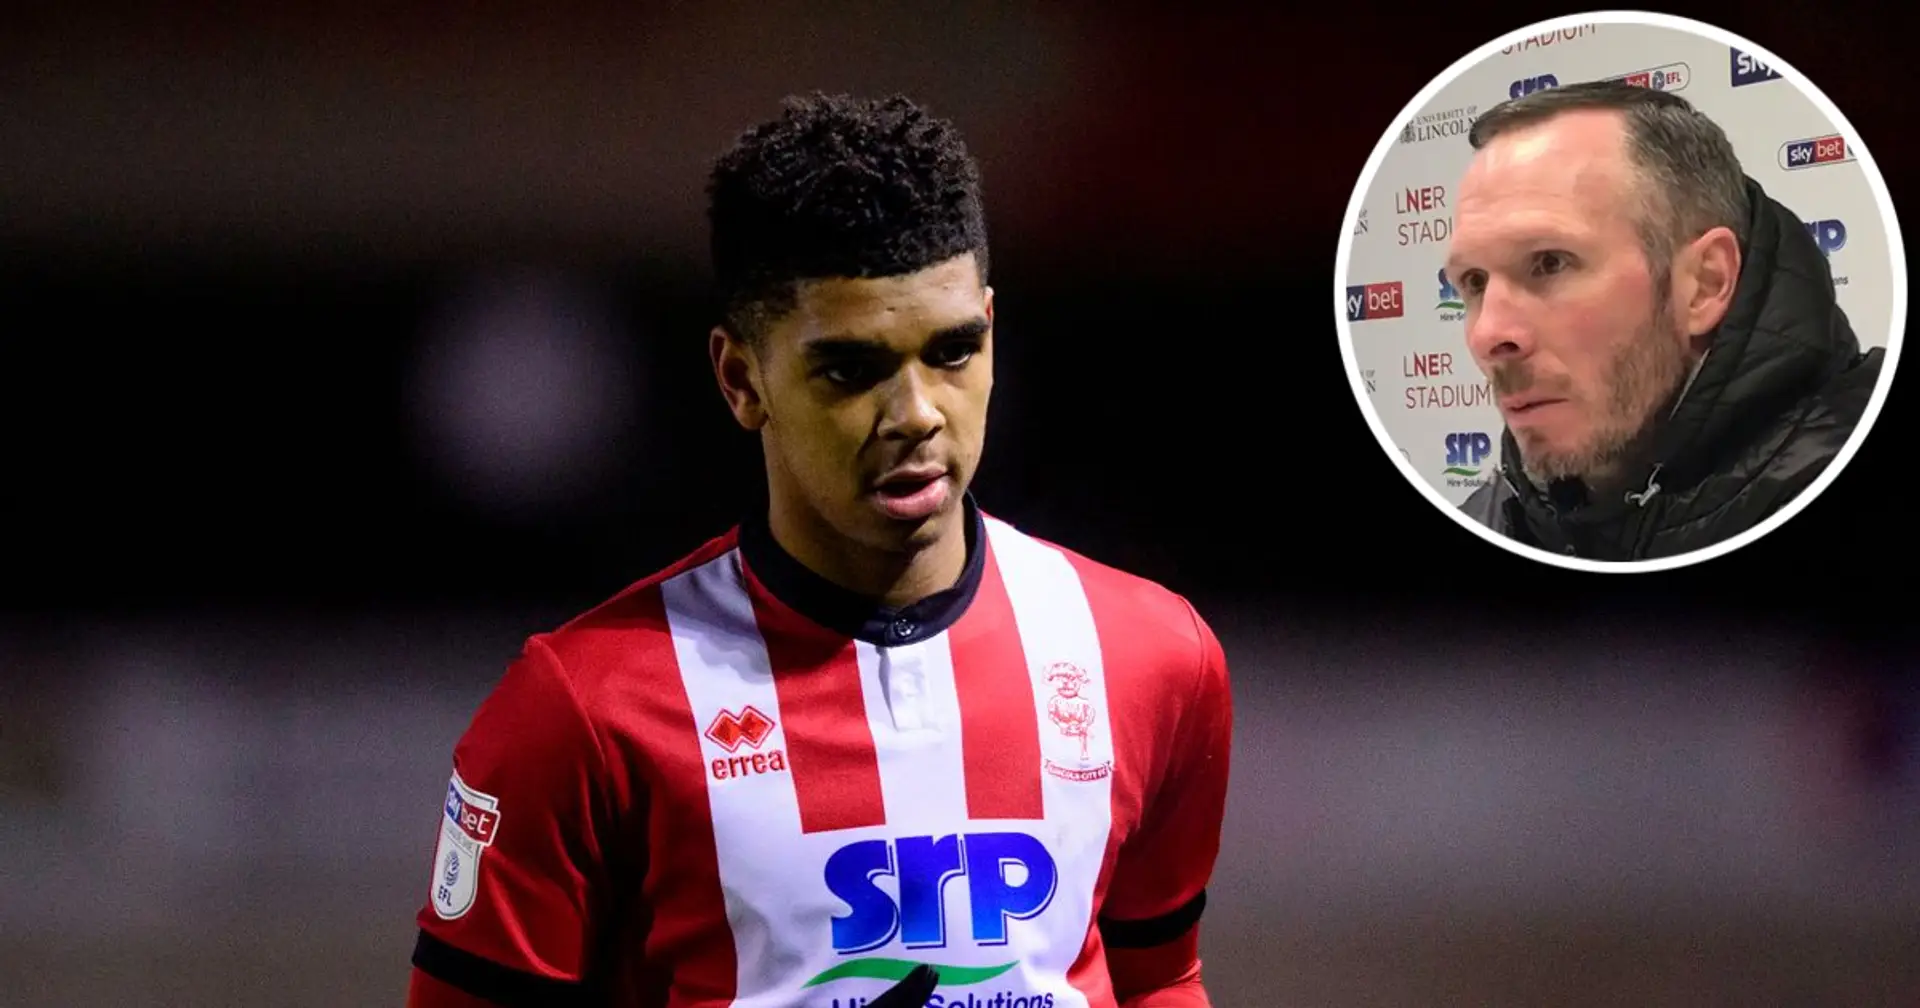 'It's a massive blow': Lincoln City’s boss gives update on Tyreece John-Jules' injury